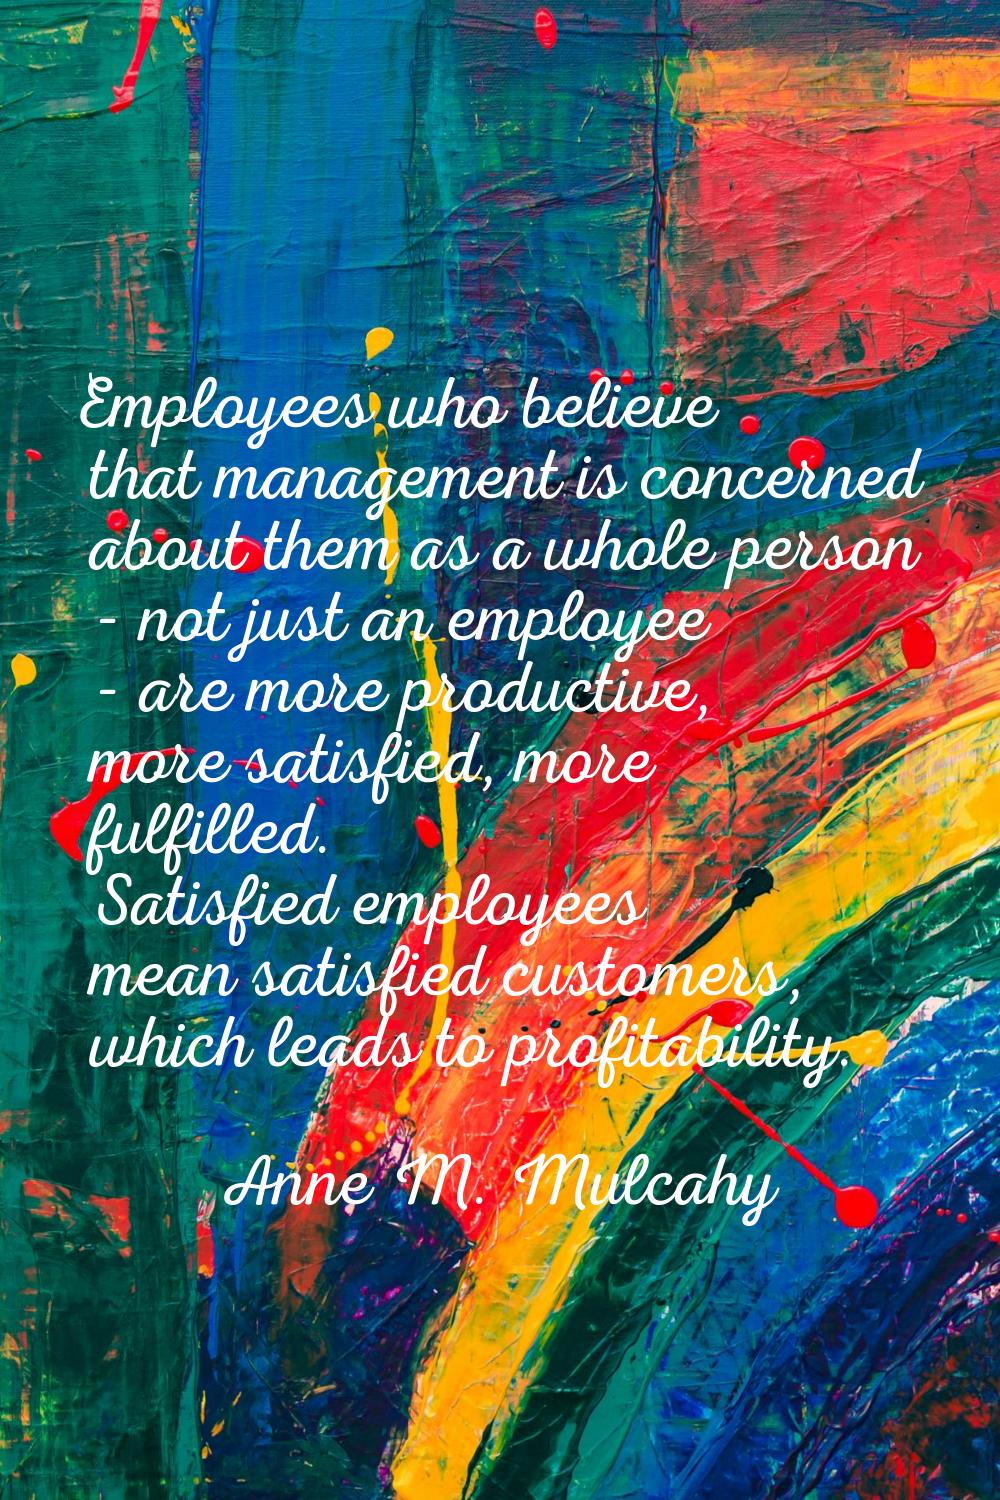 Employees who believe that management is concerned about them as a whole person - not just an emplo